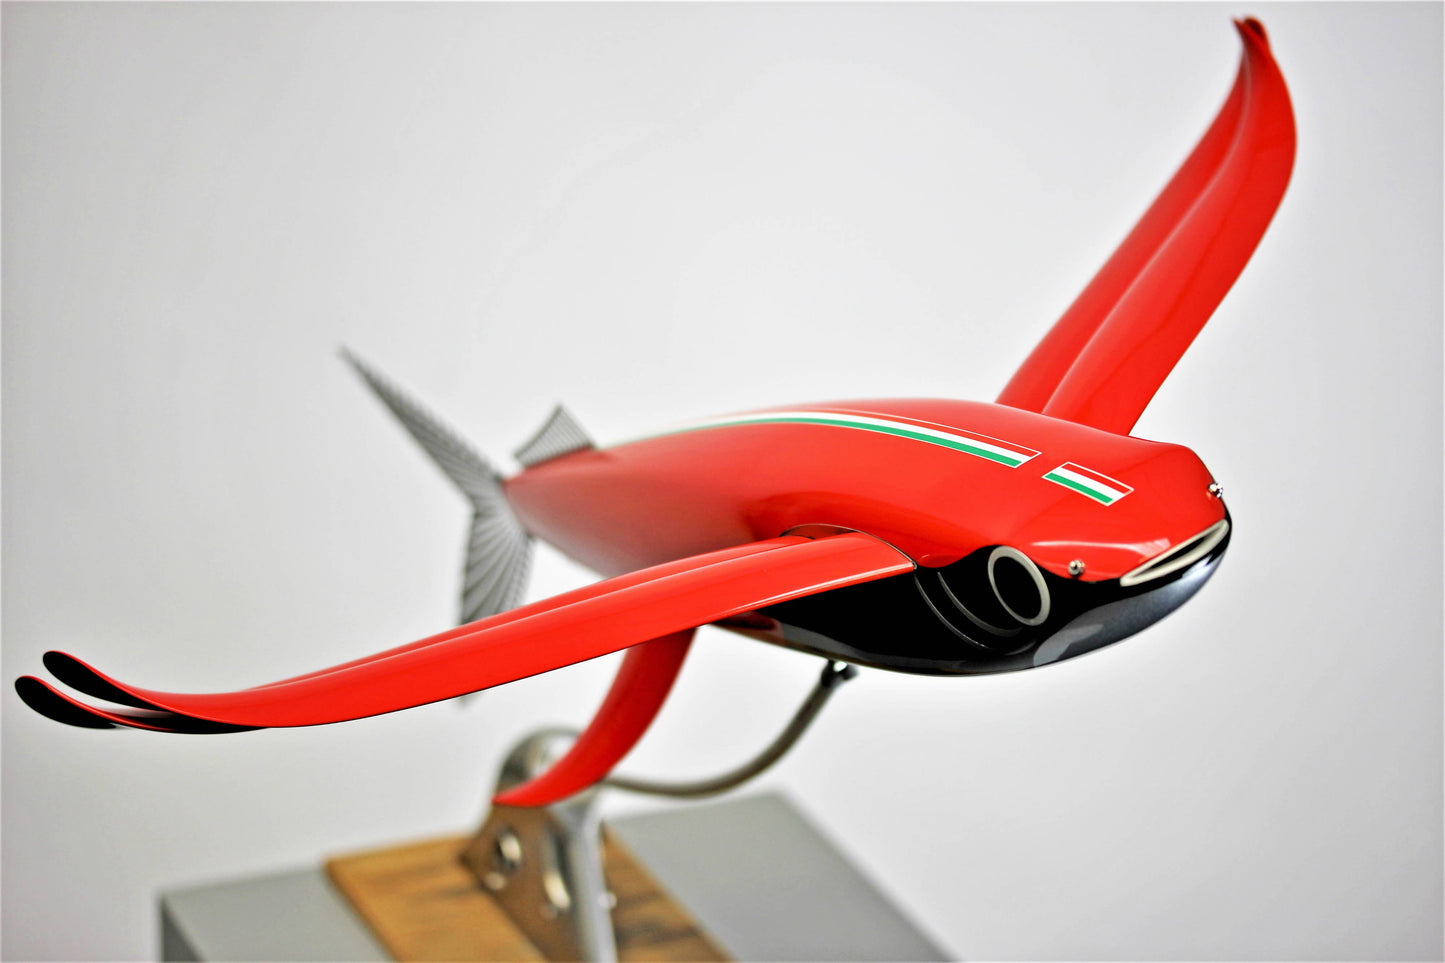 Carbon fibre Flying fish with Ferrari F1 livery on a F1 Plank base with F1 part